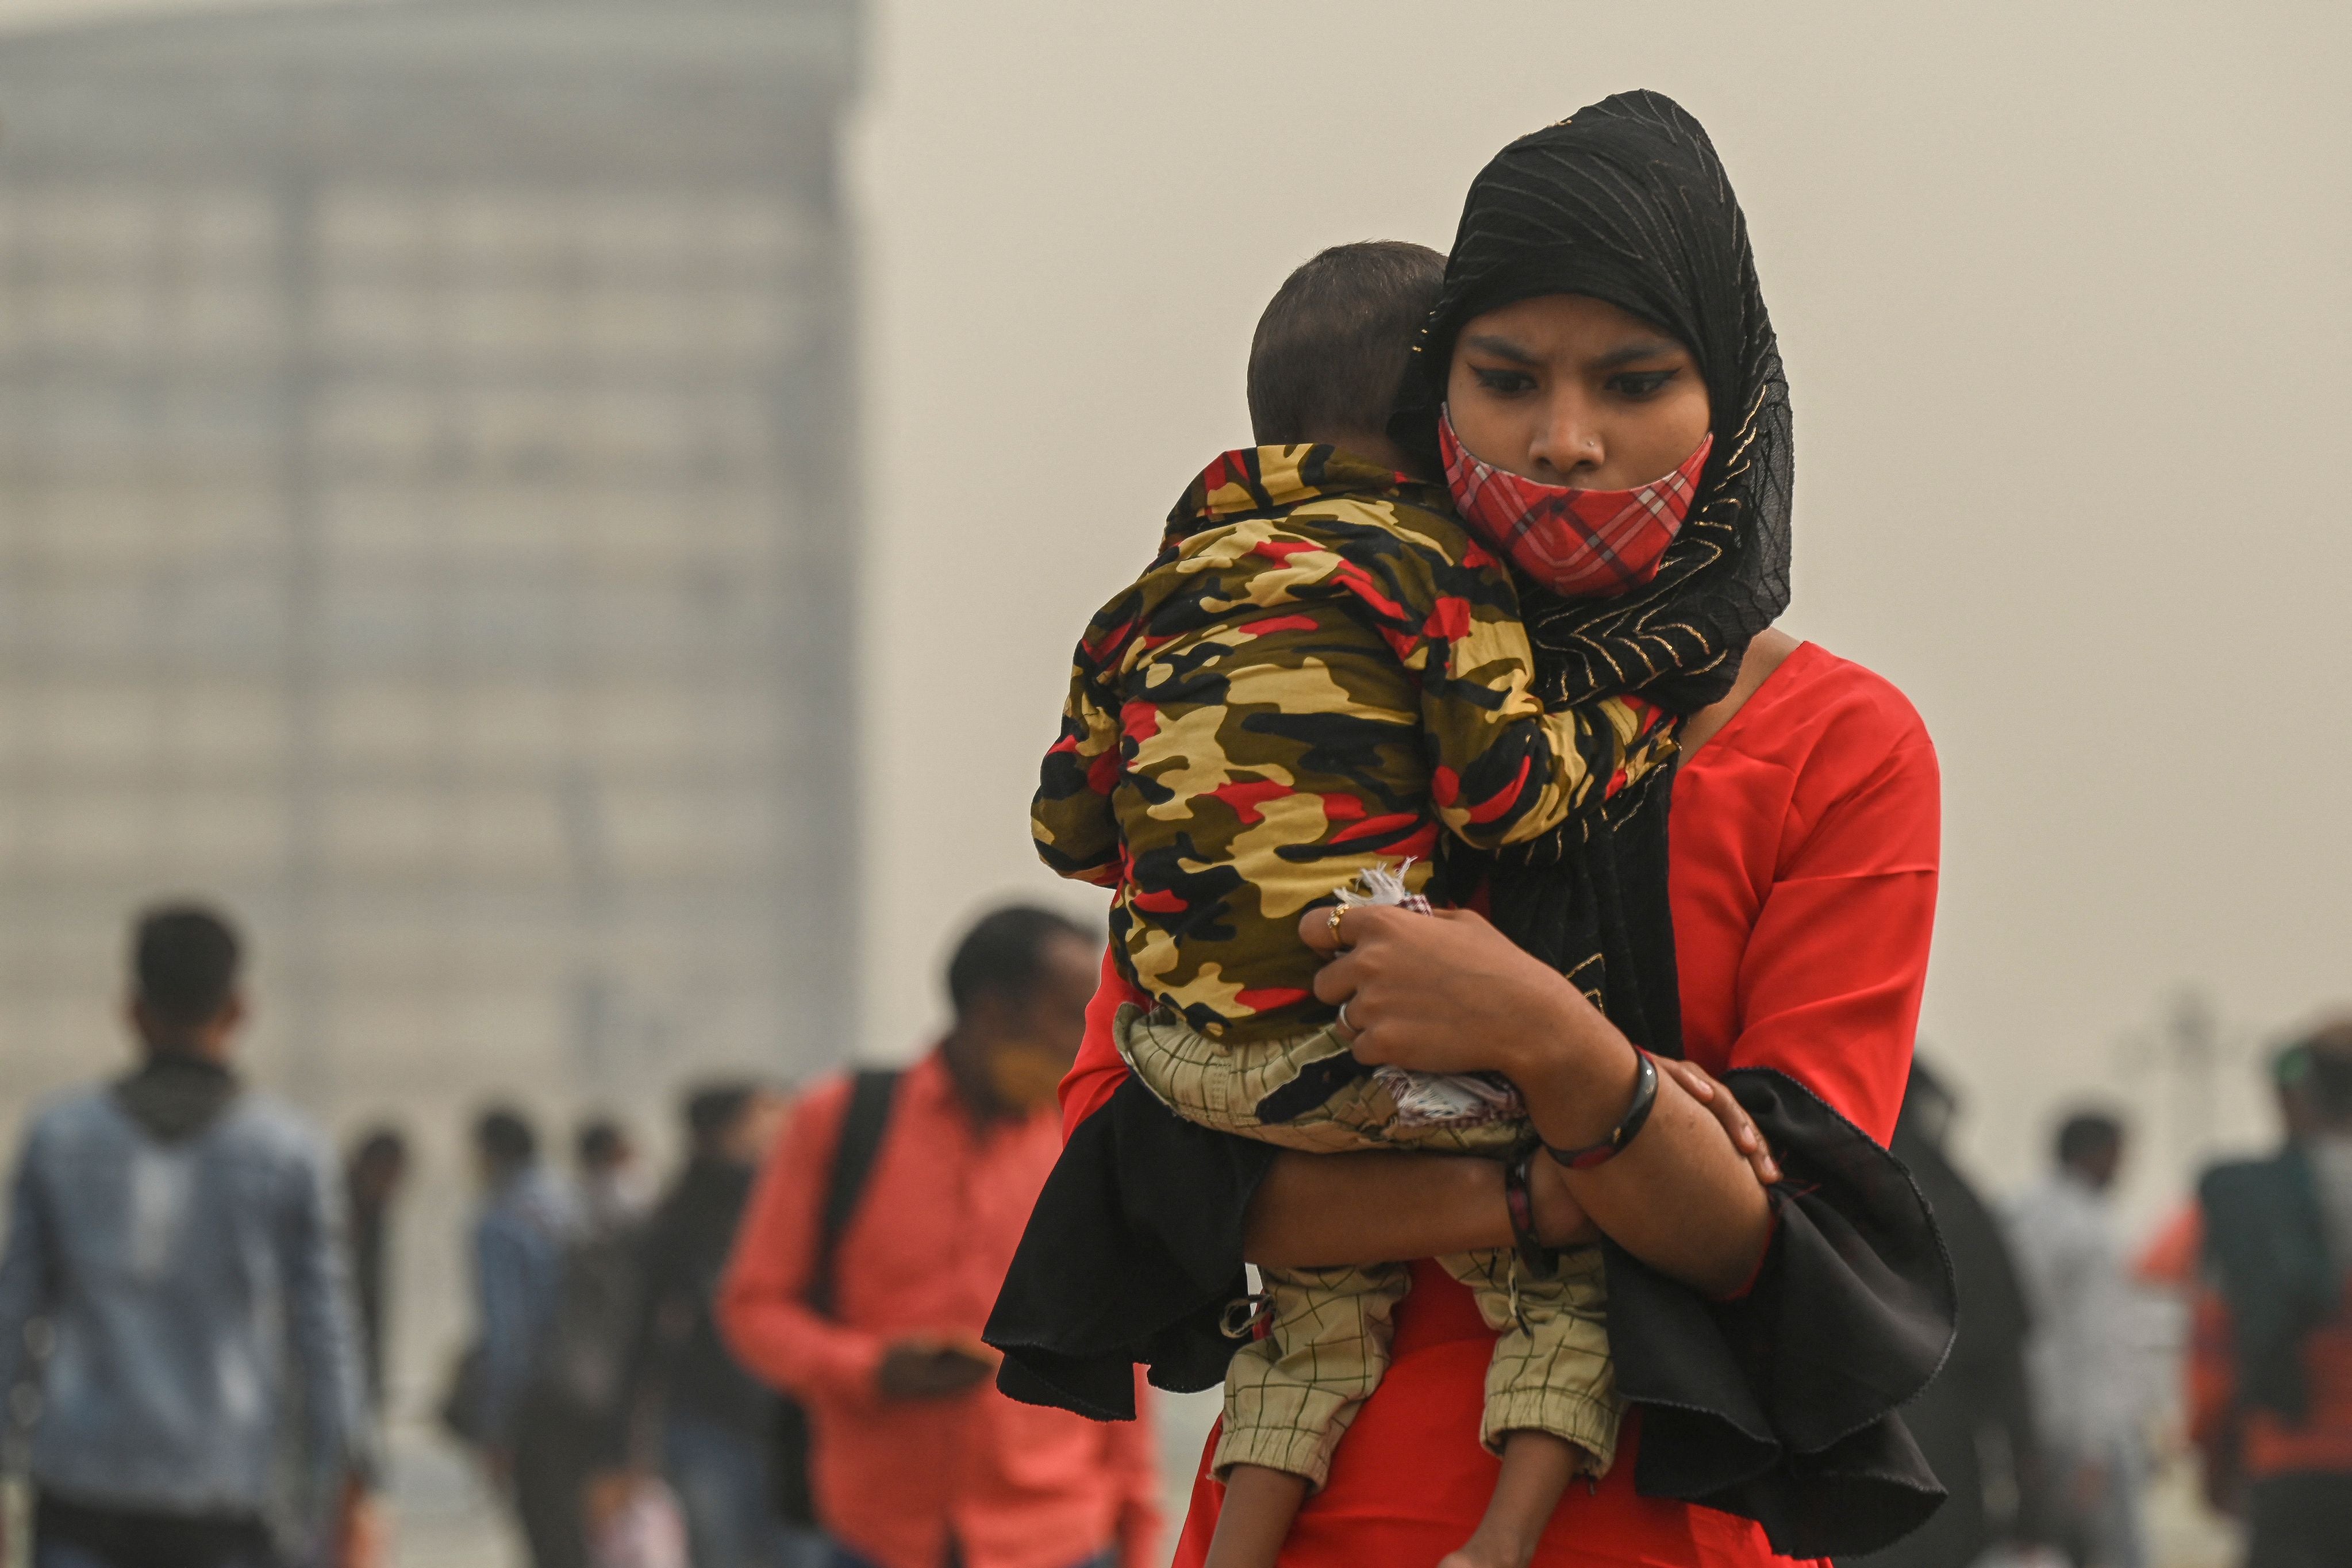 A woman carrying a child walks across a footbridge under heavy smoggy conditions in Delhi on 12 November, 2021